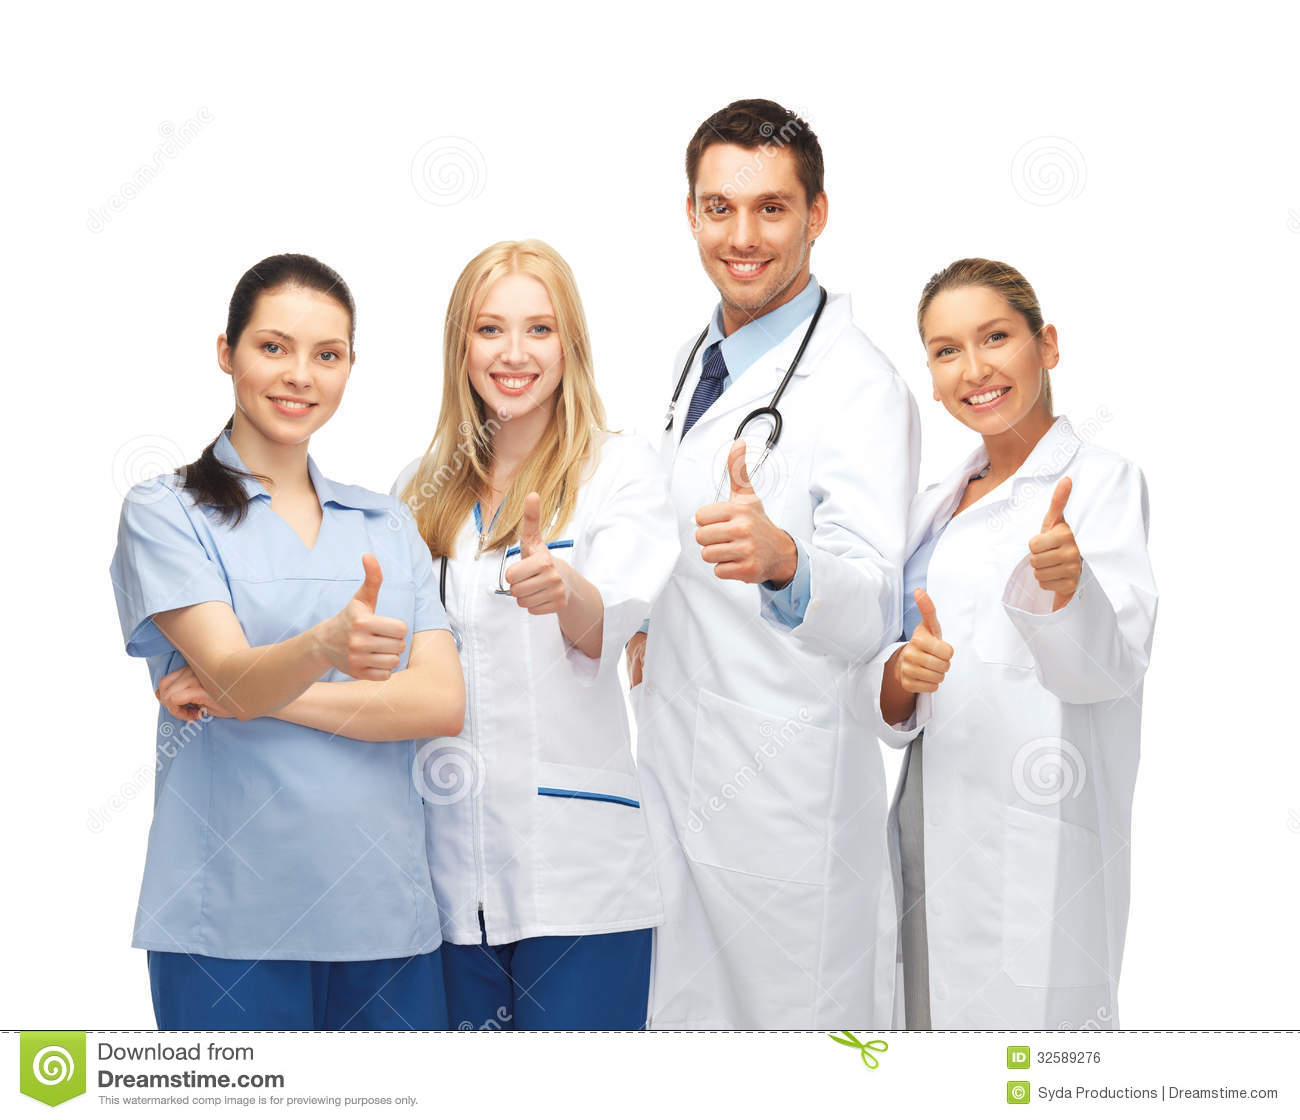 Professional Young Team Or Group Of Doctors Royalty Free Stock Image